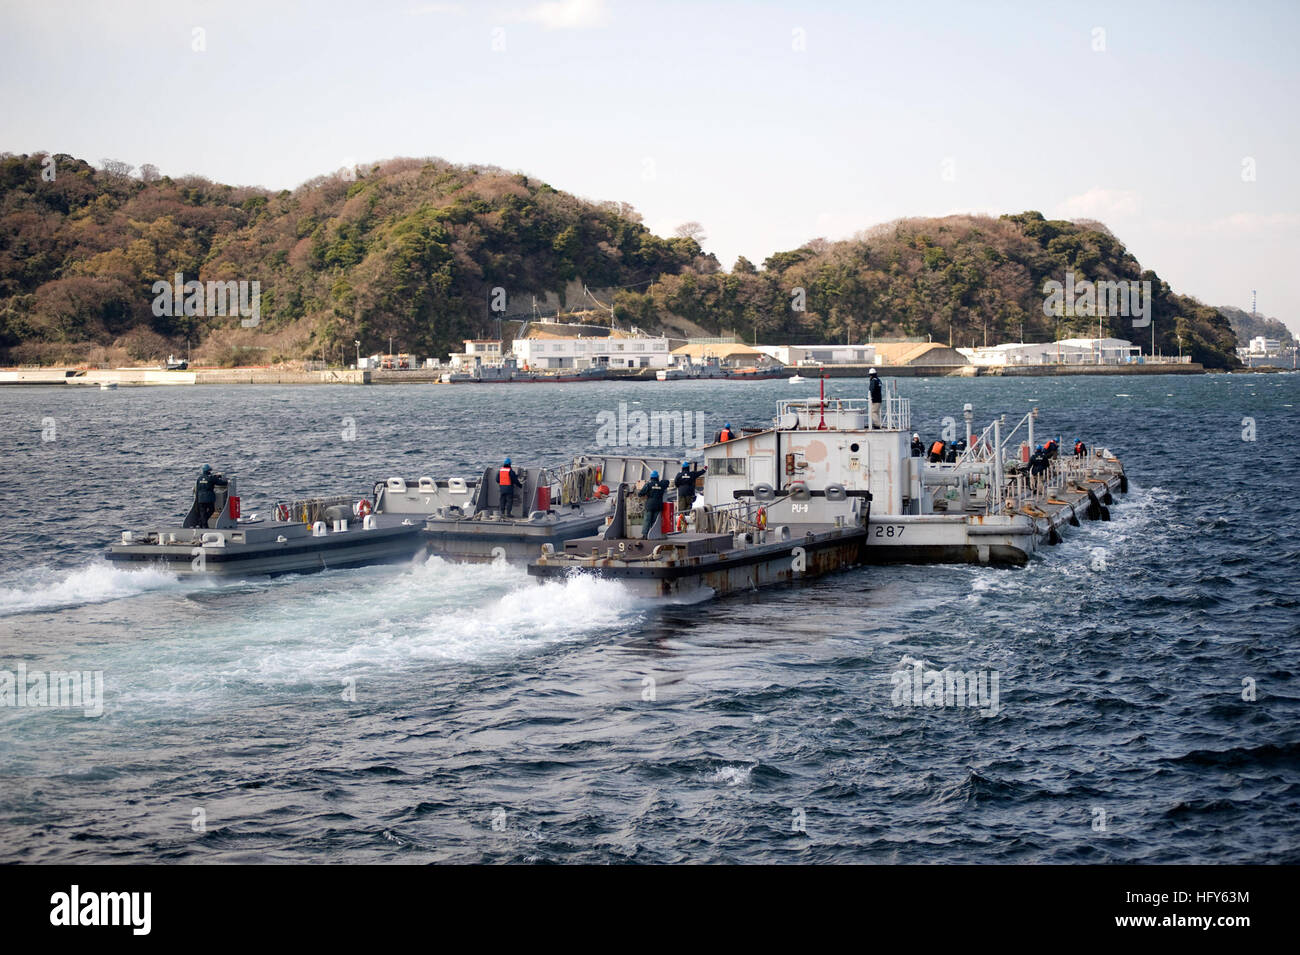 110326-N-UZ446-088 YOKOSUKA, Japan (March 26, 2011) U.S. Navy Barge YON-287, filled with 851,000 liters (225,000 gallons) of fresh water, departs Fleet Activities Yokosuka to support cooling efforts at the Fukushima Daiichi nuclear power plant. YON-287 is the second of two barges supplied by the U.S. Navy to the government of Japan to aid in the cooling efforts. The two barges supplied a total of 1.89 million liters (500,000 gallons) of fresh water. (U.S. Navy Photo by Mass Communication Specialist 2nd Class John Smolinski/Released) US Navy 110326-N-UZ446-088 Stock Photo